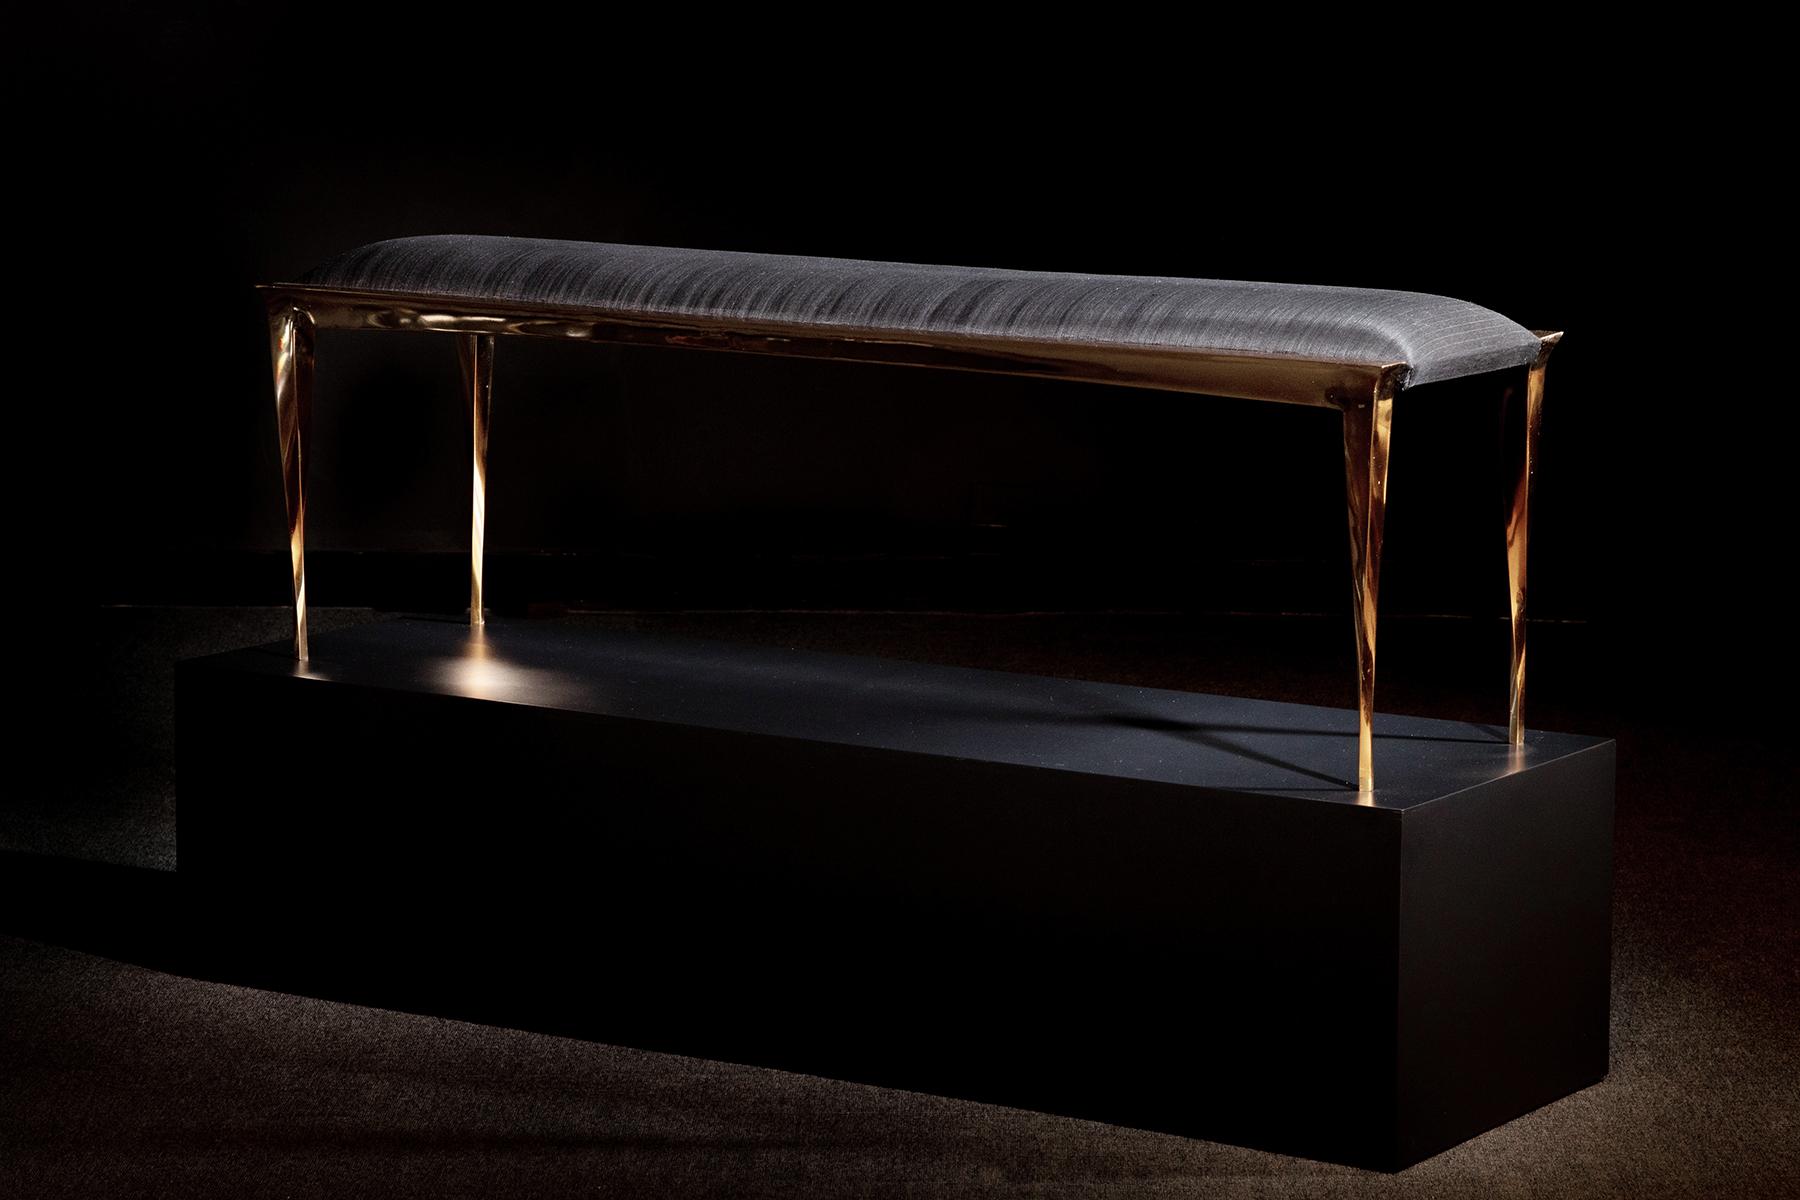 Long rectangular bench in polished bronze, the center upholstered with a narrow, low cushion in black fabric. 
Custom sizes and finishes available.